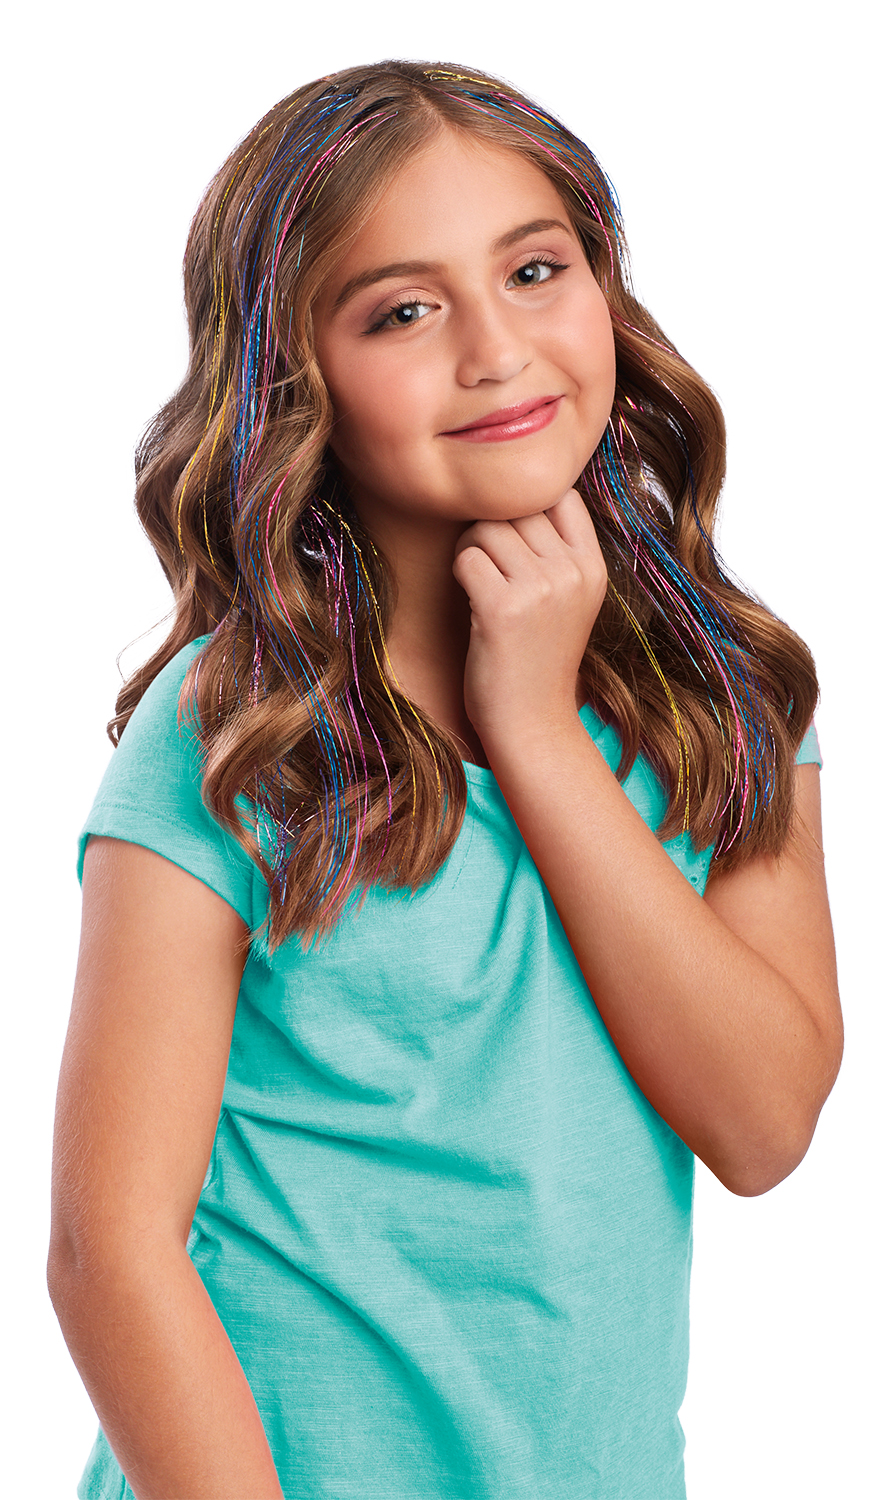 Cra-Z-Art Be Inspired Crazy Bands and Strands Bracelet Studio, Multicolor Kit Ages 4 and up - image 3 of 11